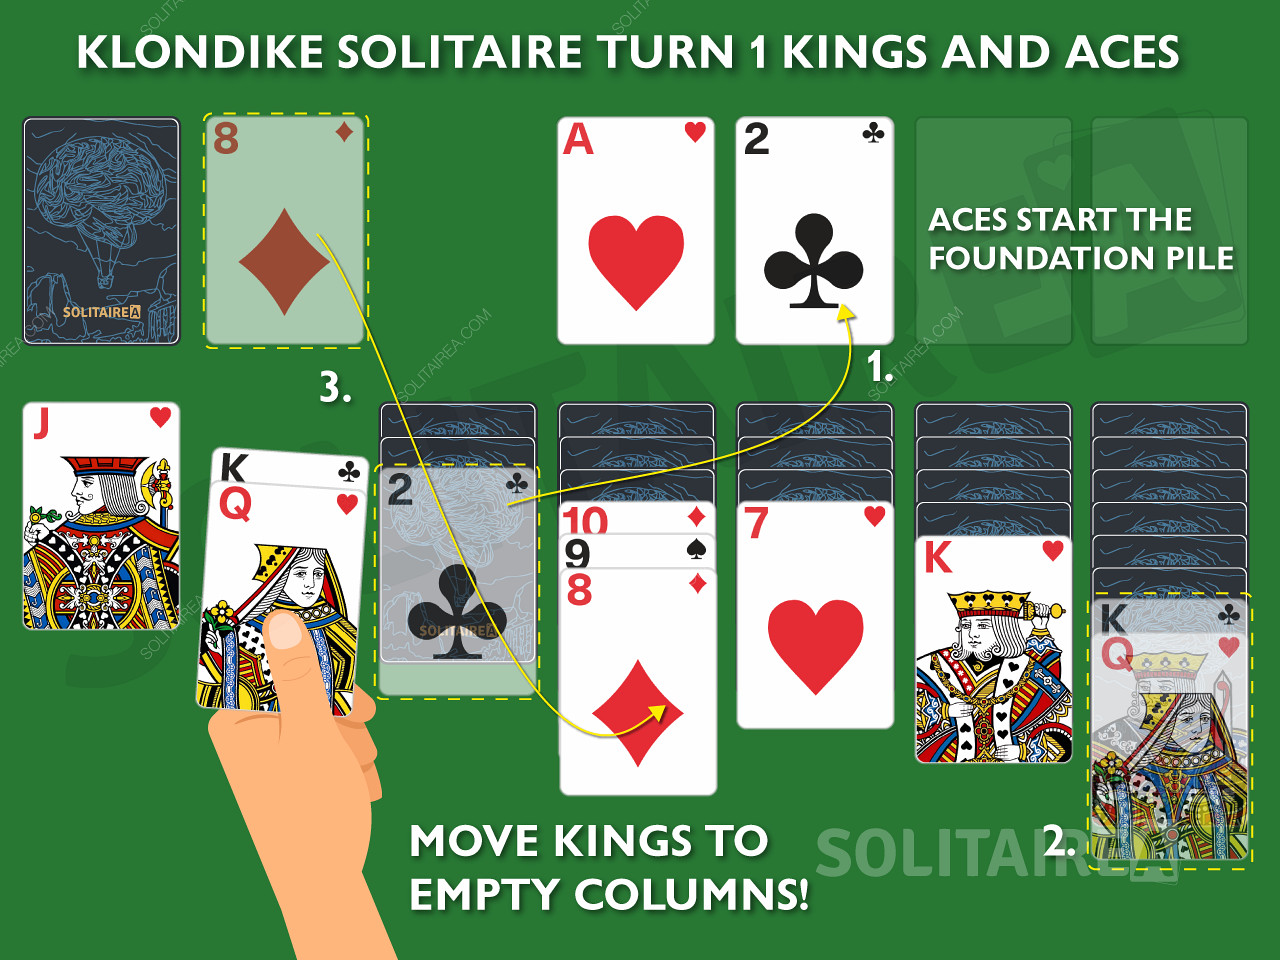 Klondike Solitaire Turn 1 Kings and Aces